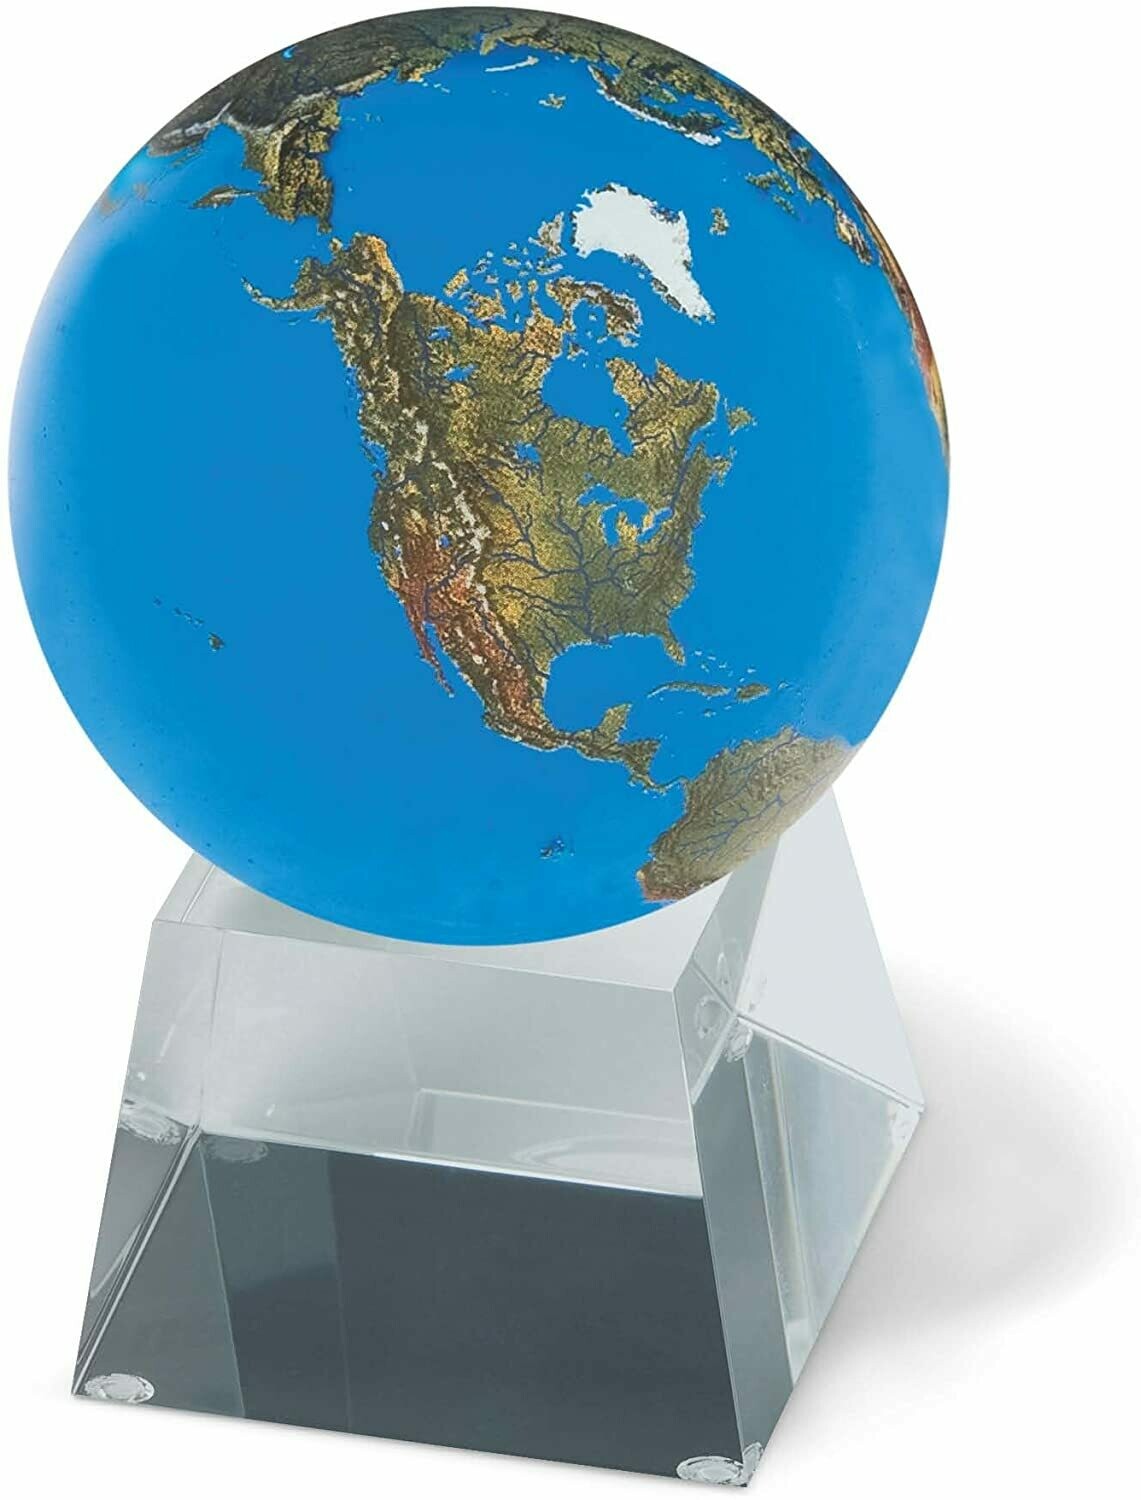 Aqua Crystal Sphere with Natural Earth Continents with Tapered Glass Spinning Base, 3 Inch Diameter